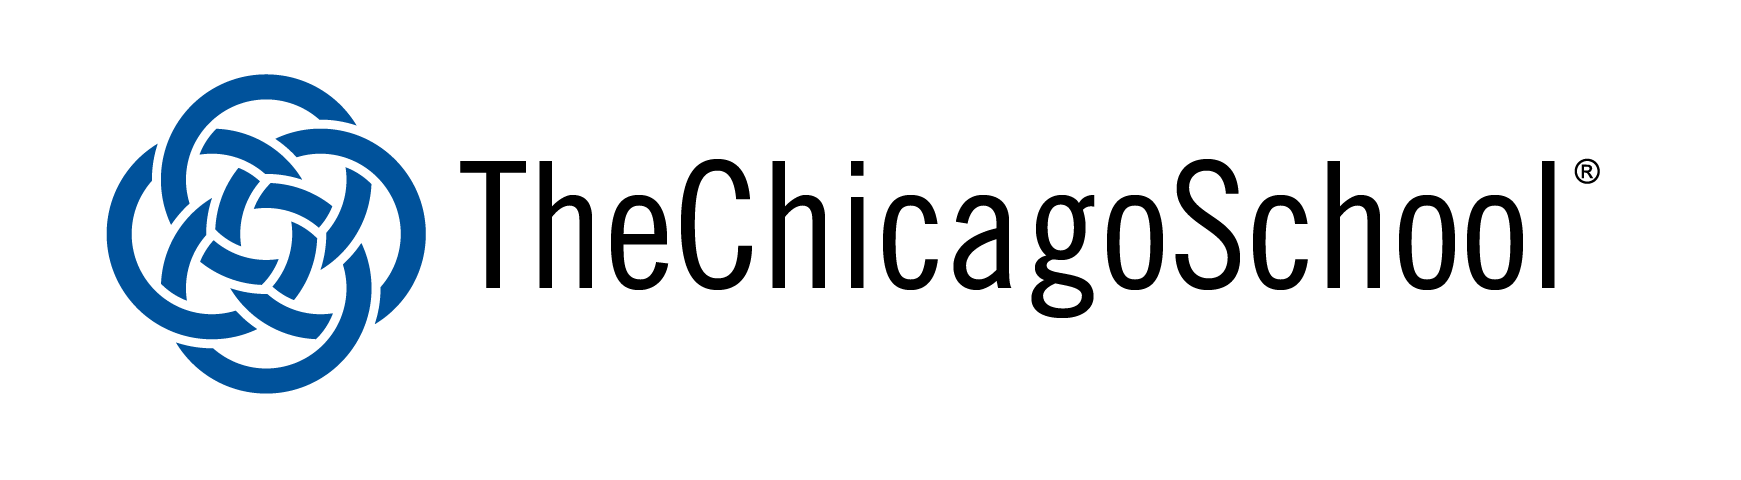 the-chicago-school-logo.png